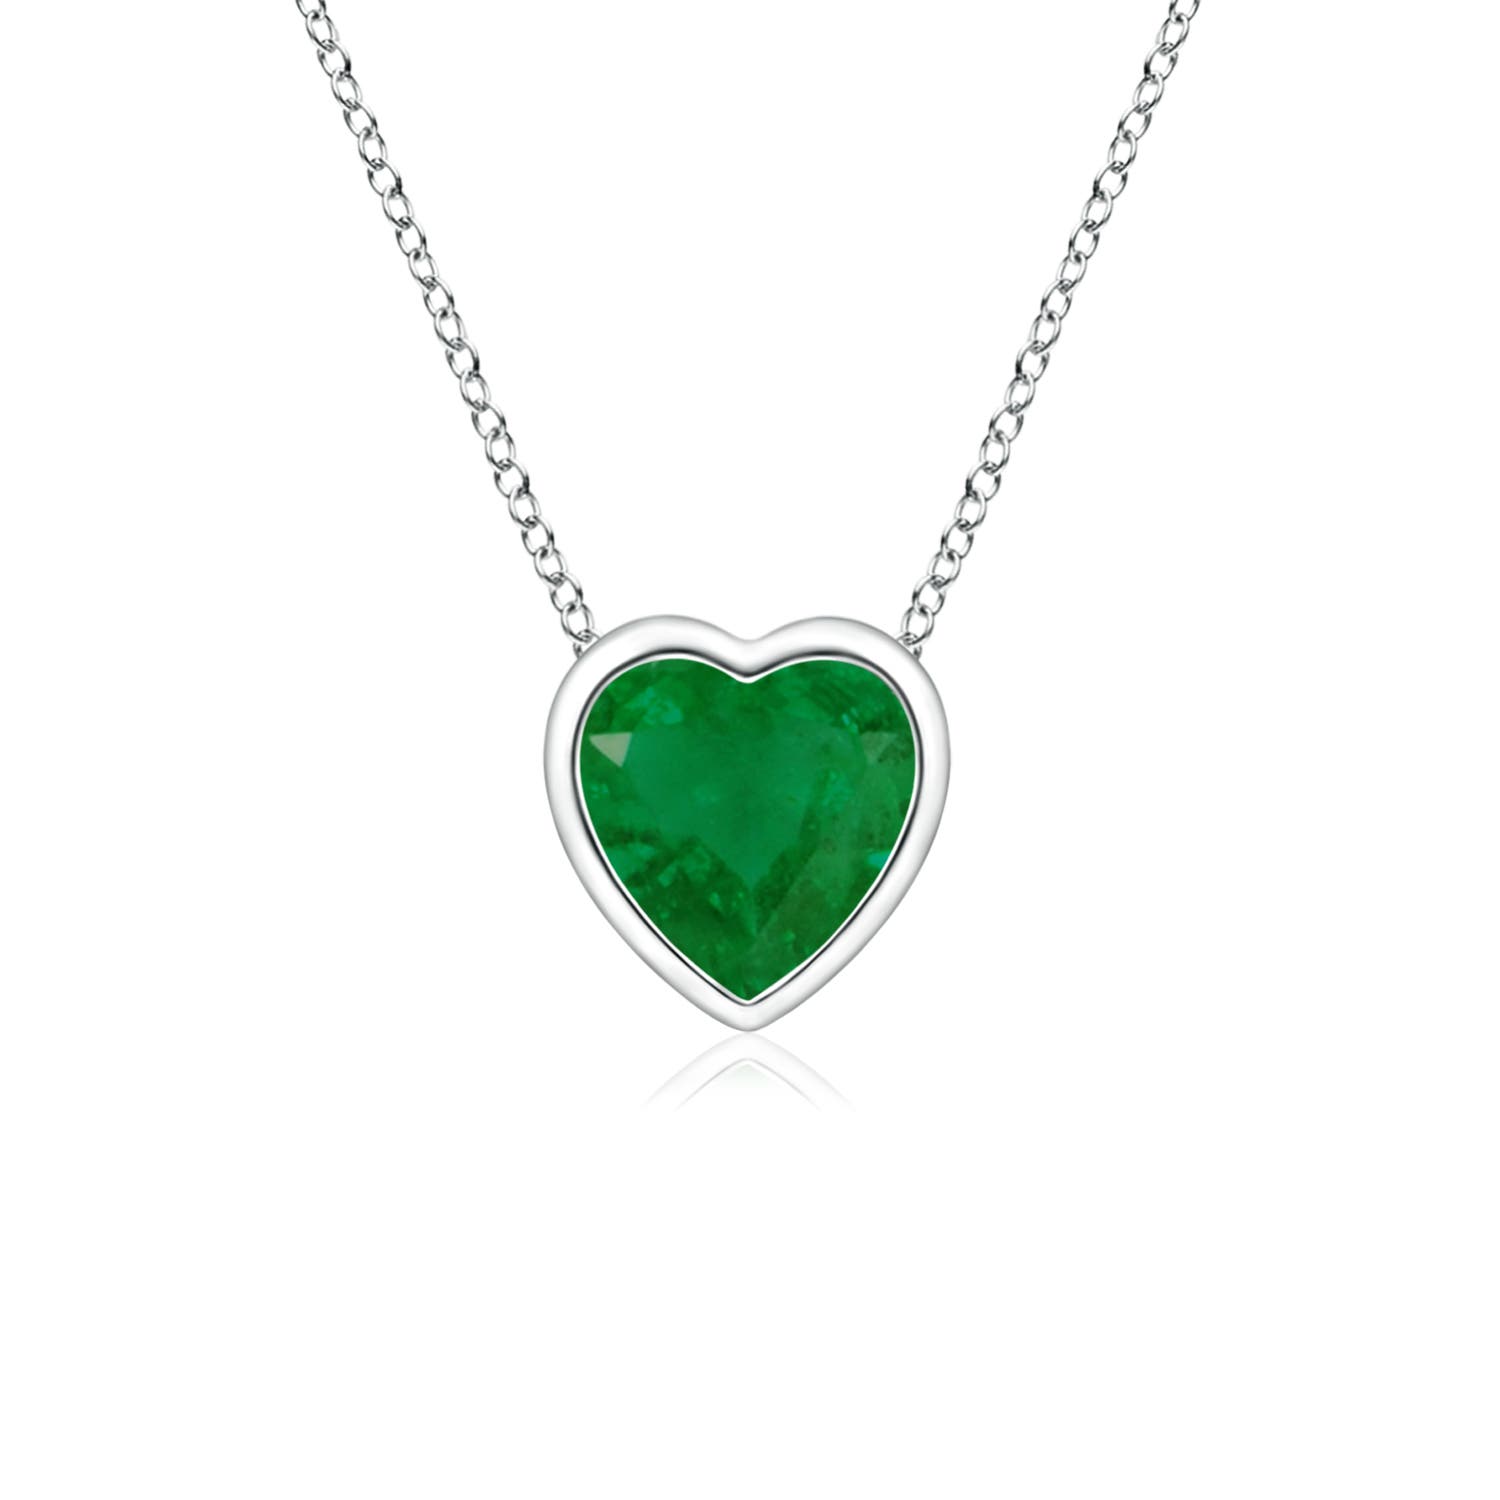 A - Emerald / 0.2 CT / 14 KT White Gold